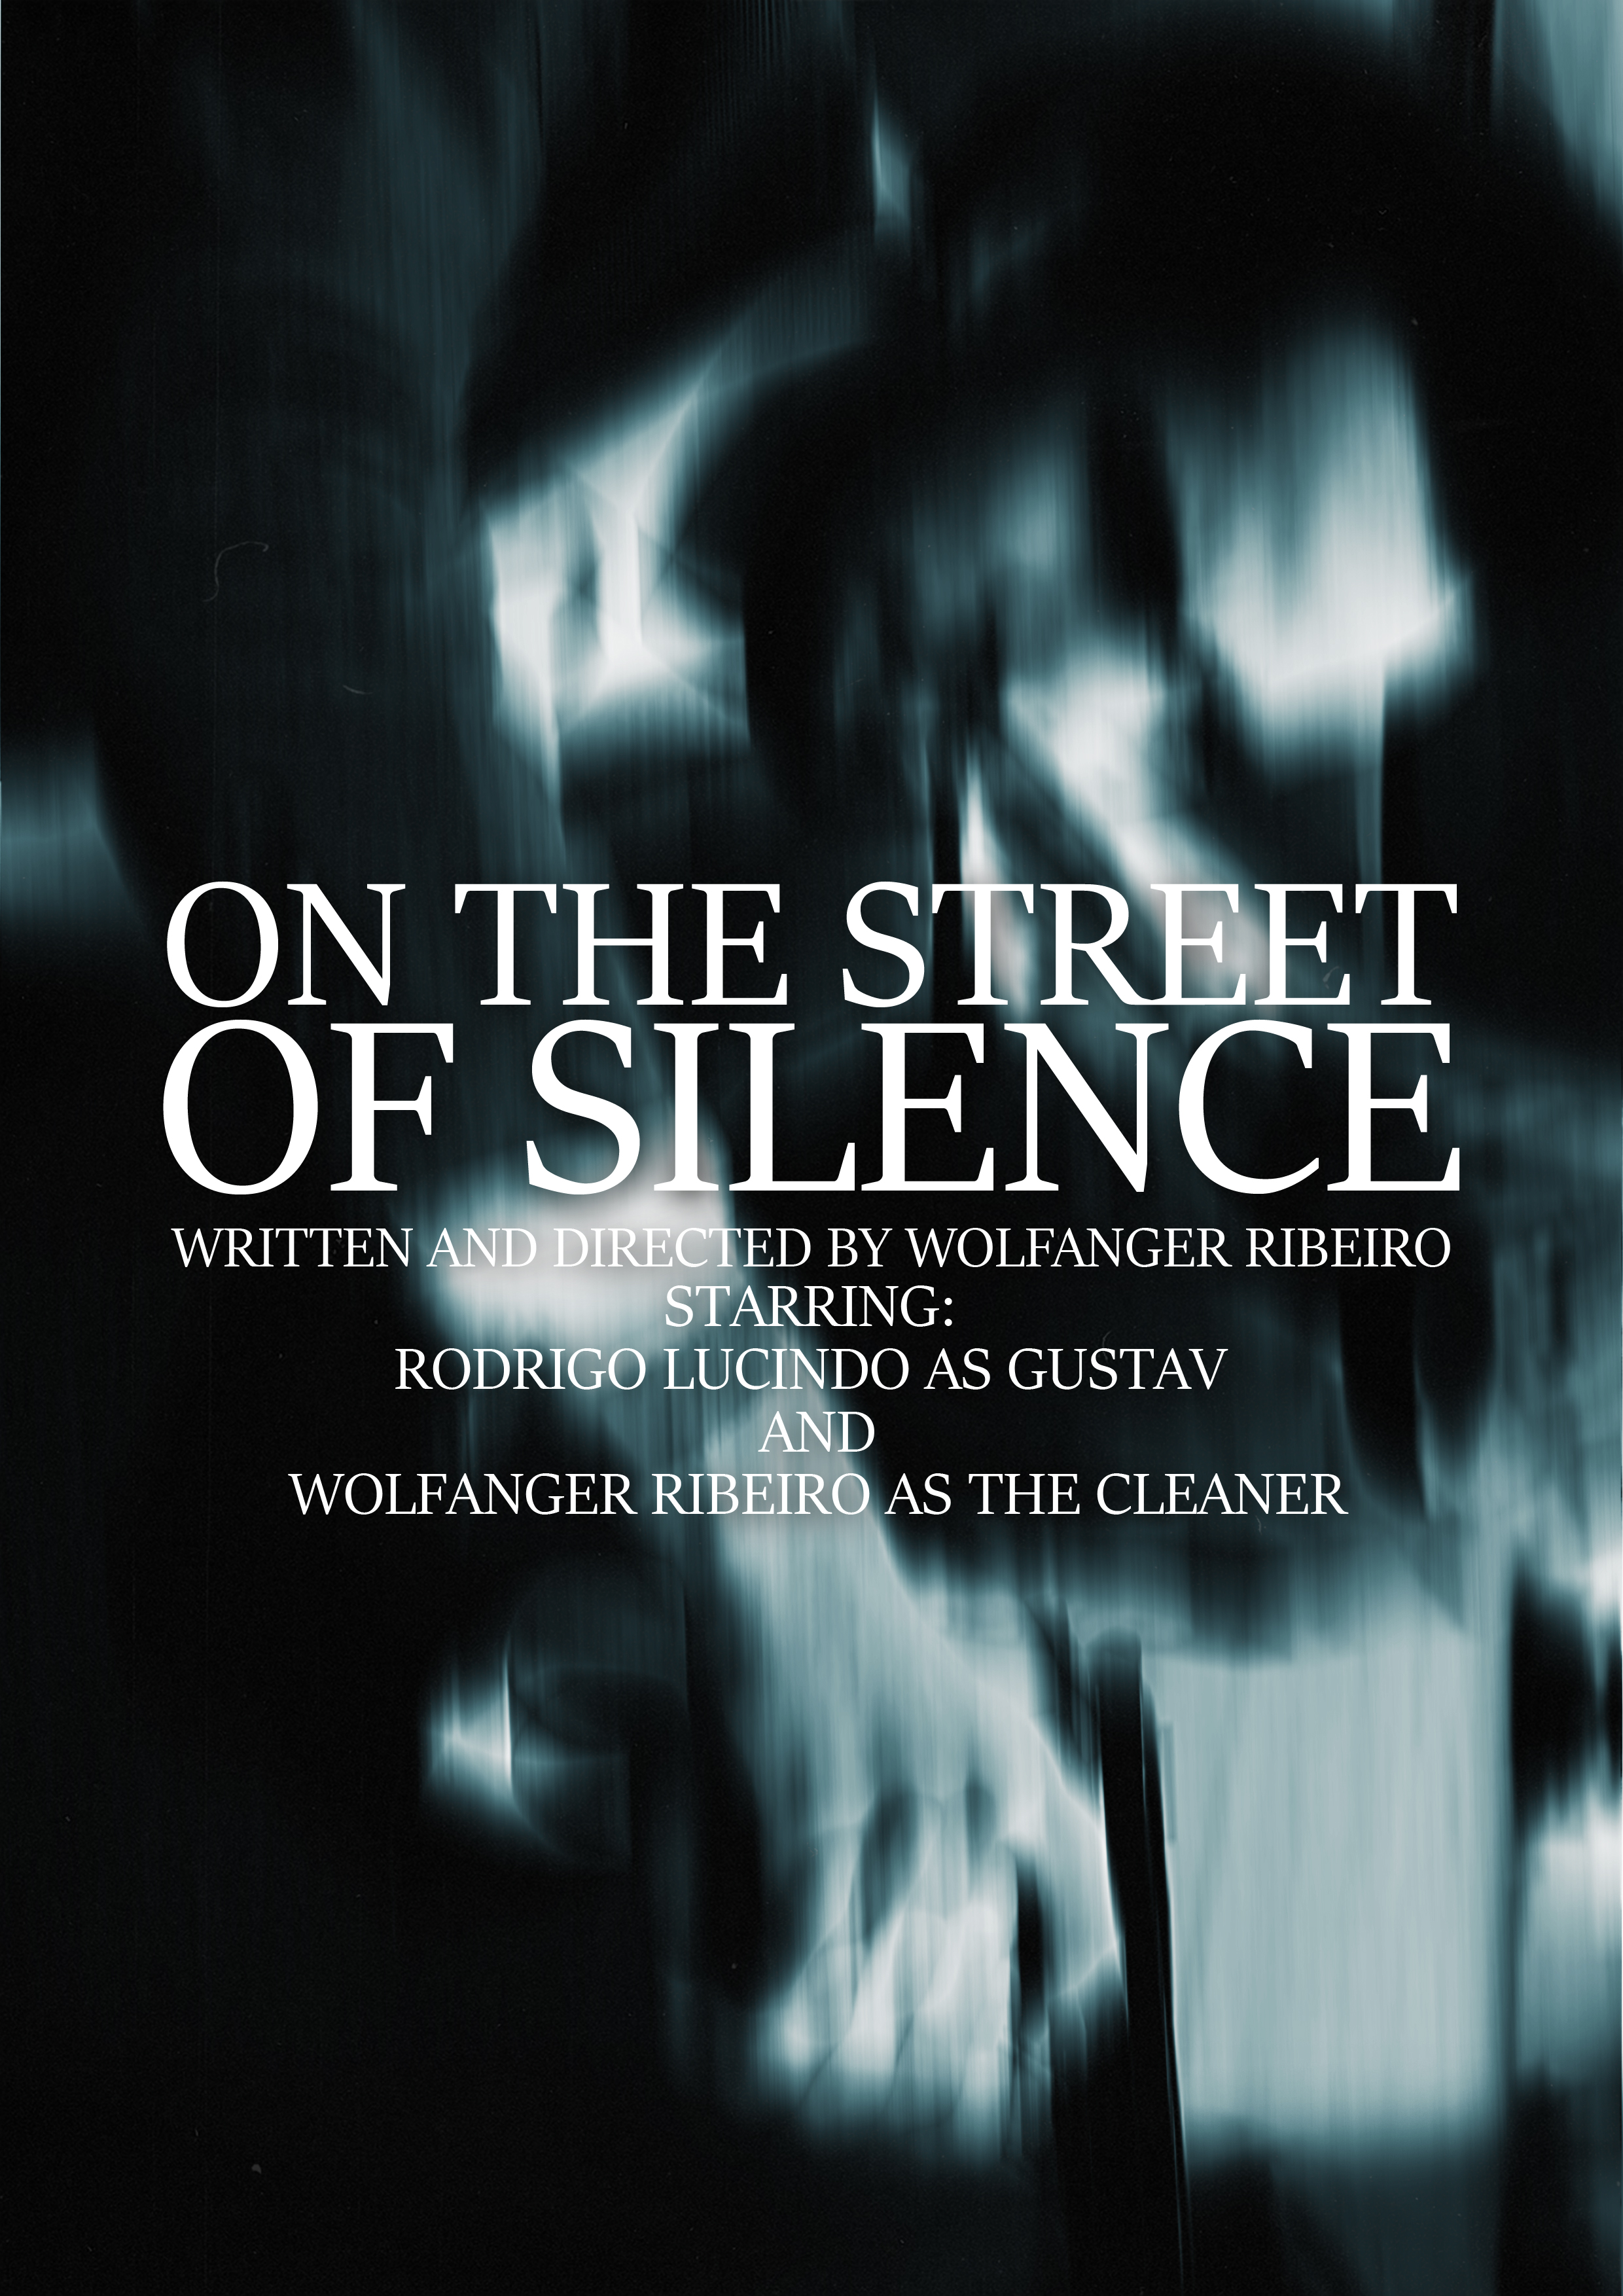 On the Street of Silence